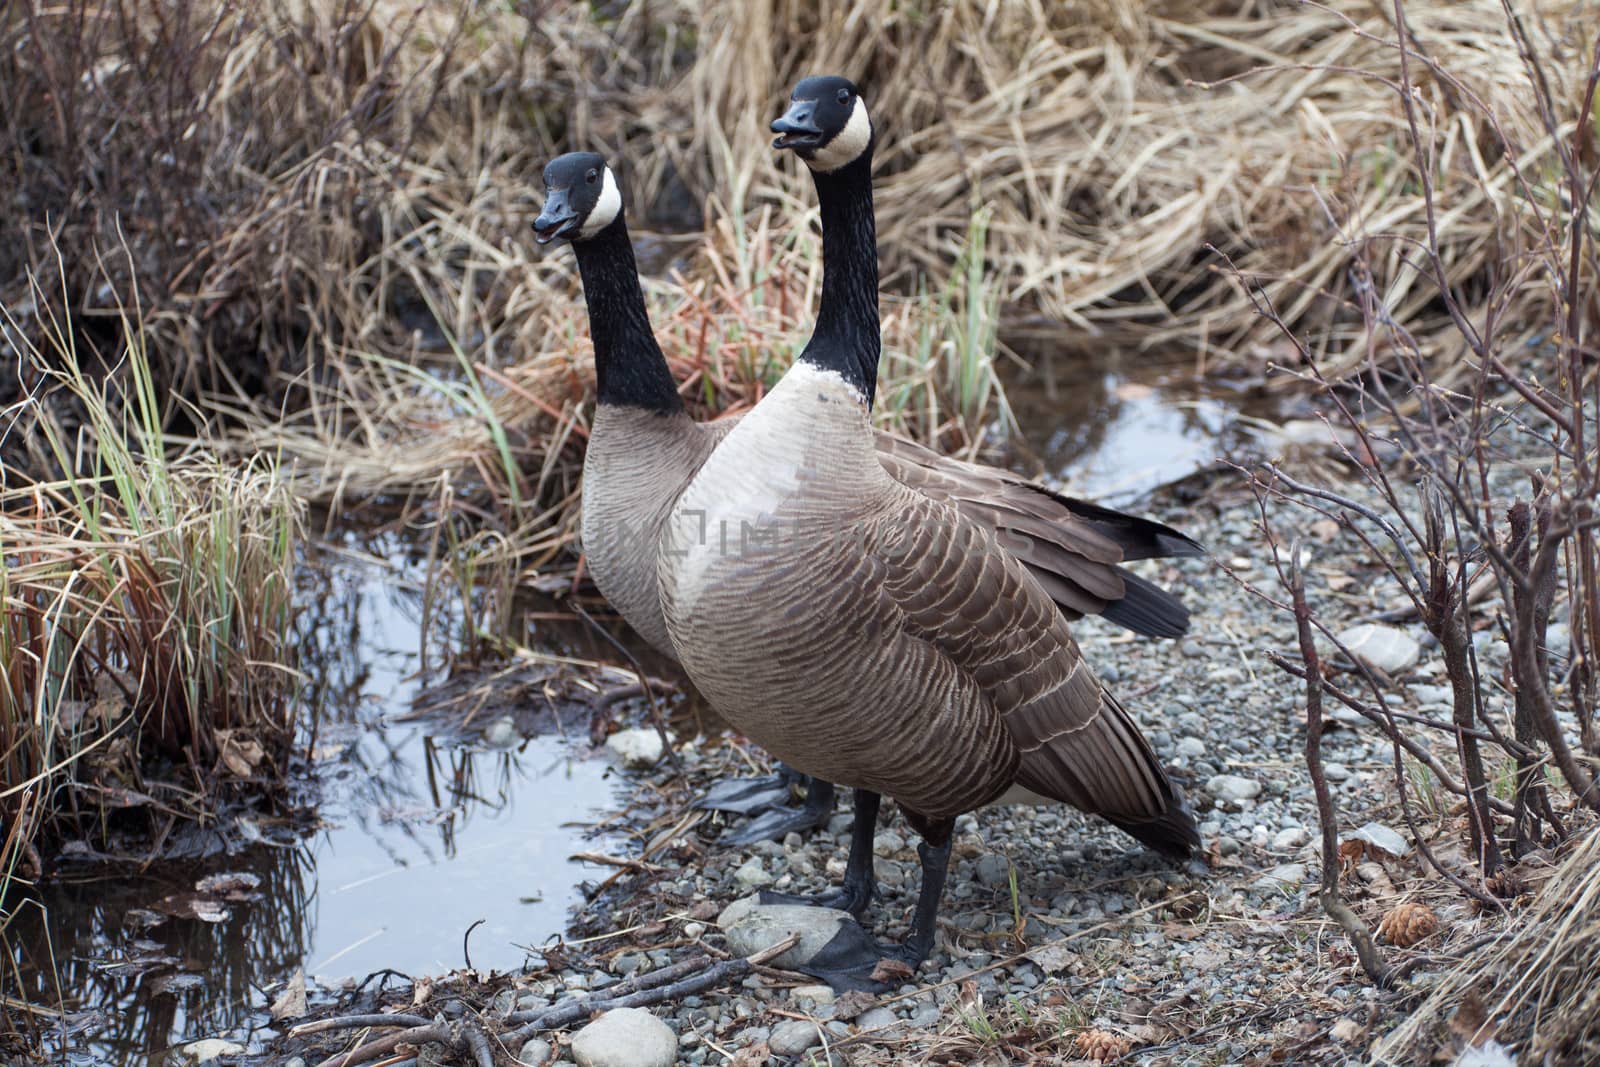 Two canadian geese look alarmed